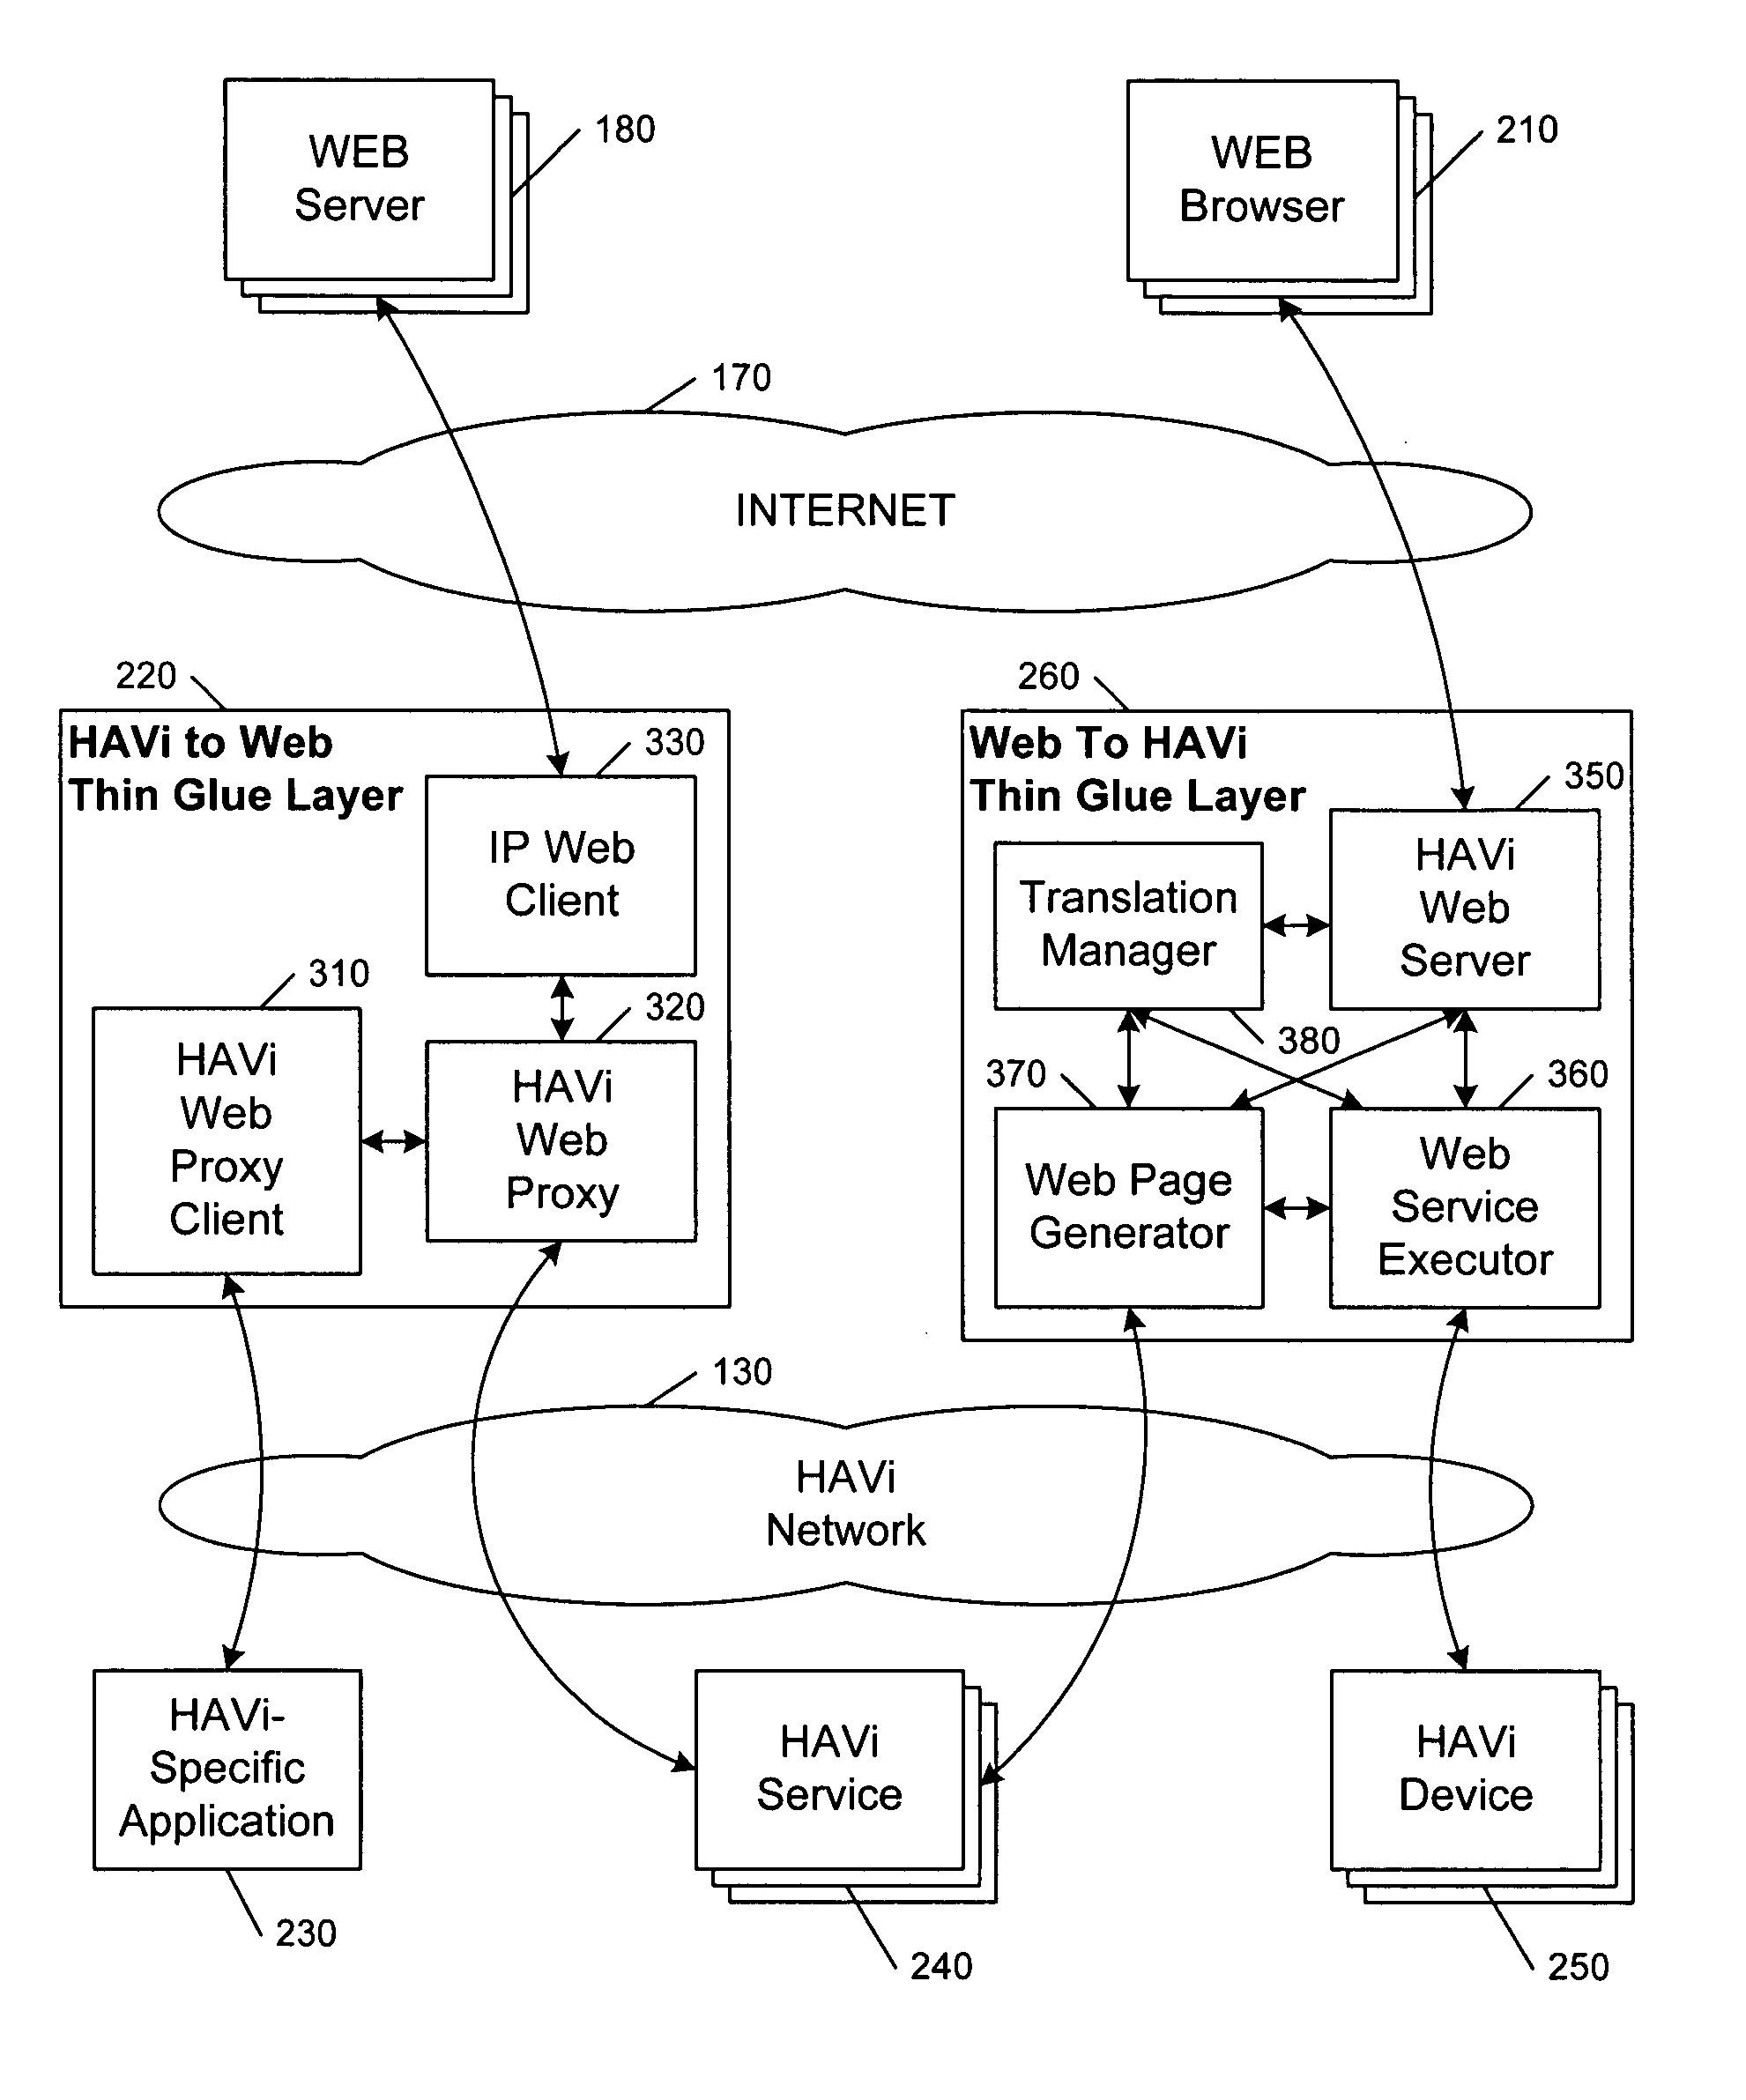 Architecture of a bridge between a non-IP network and the web